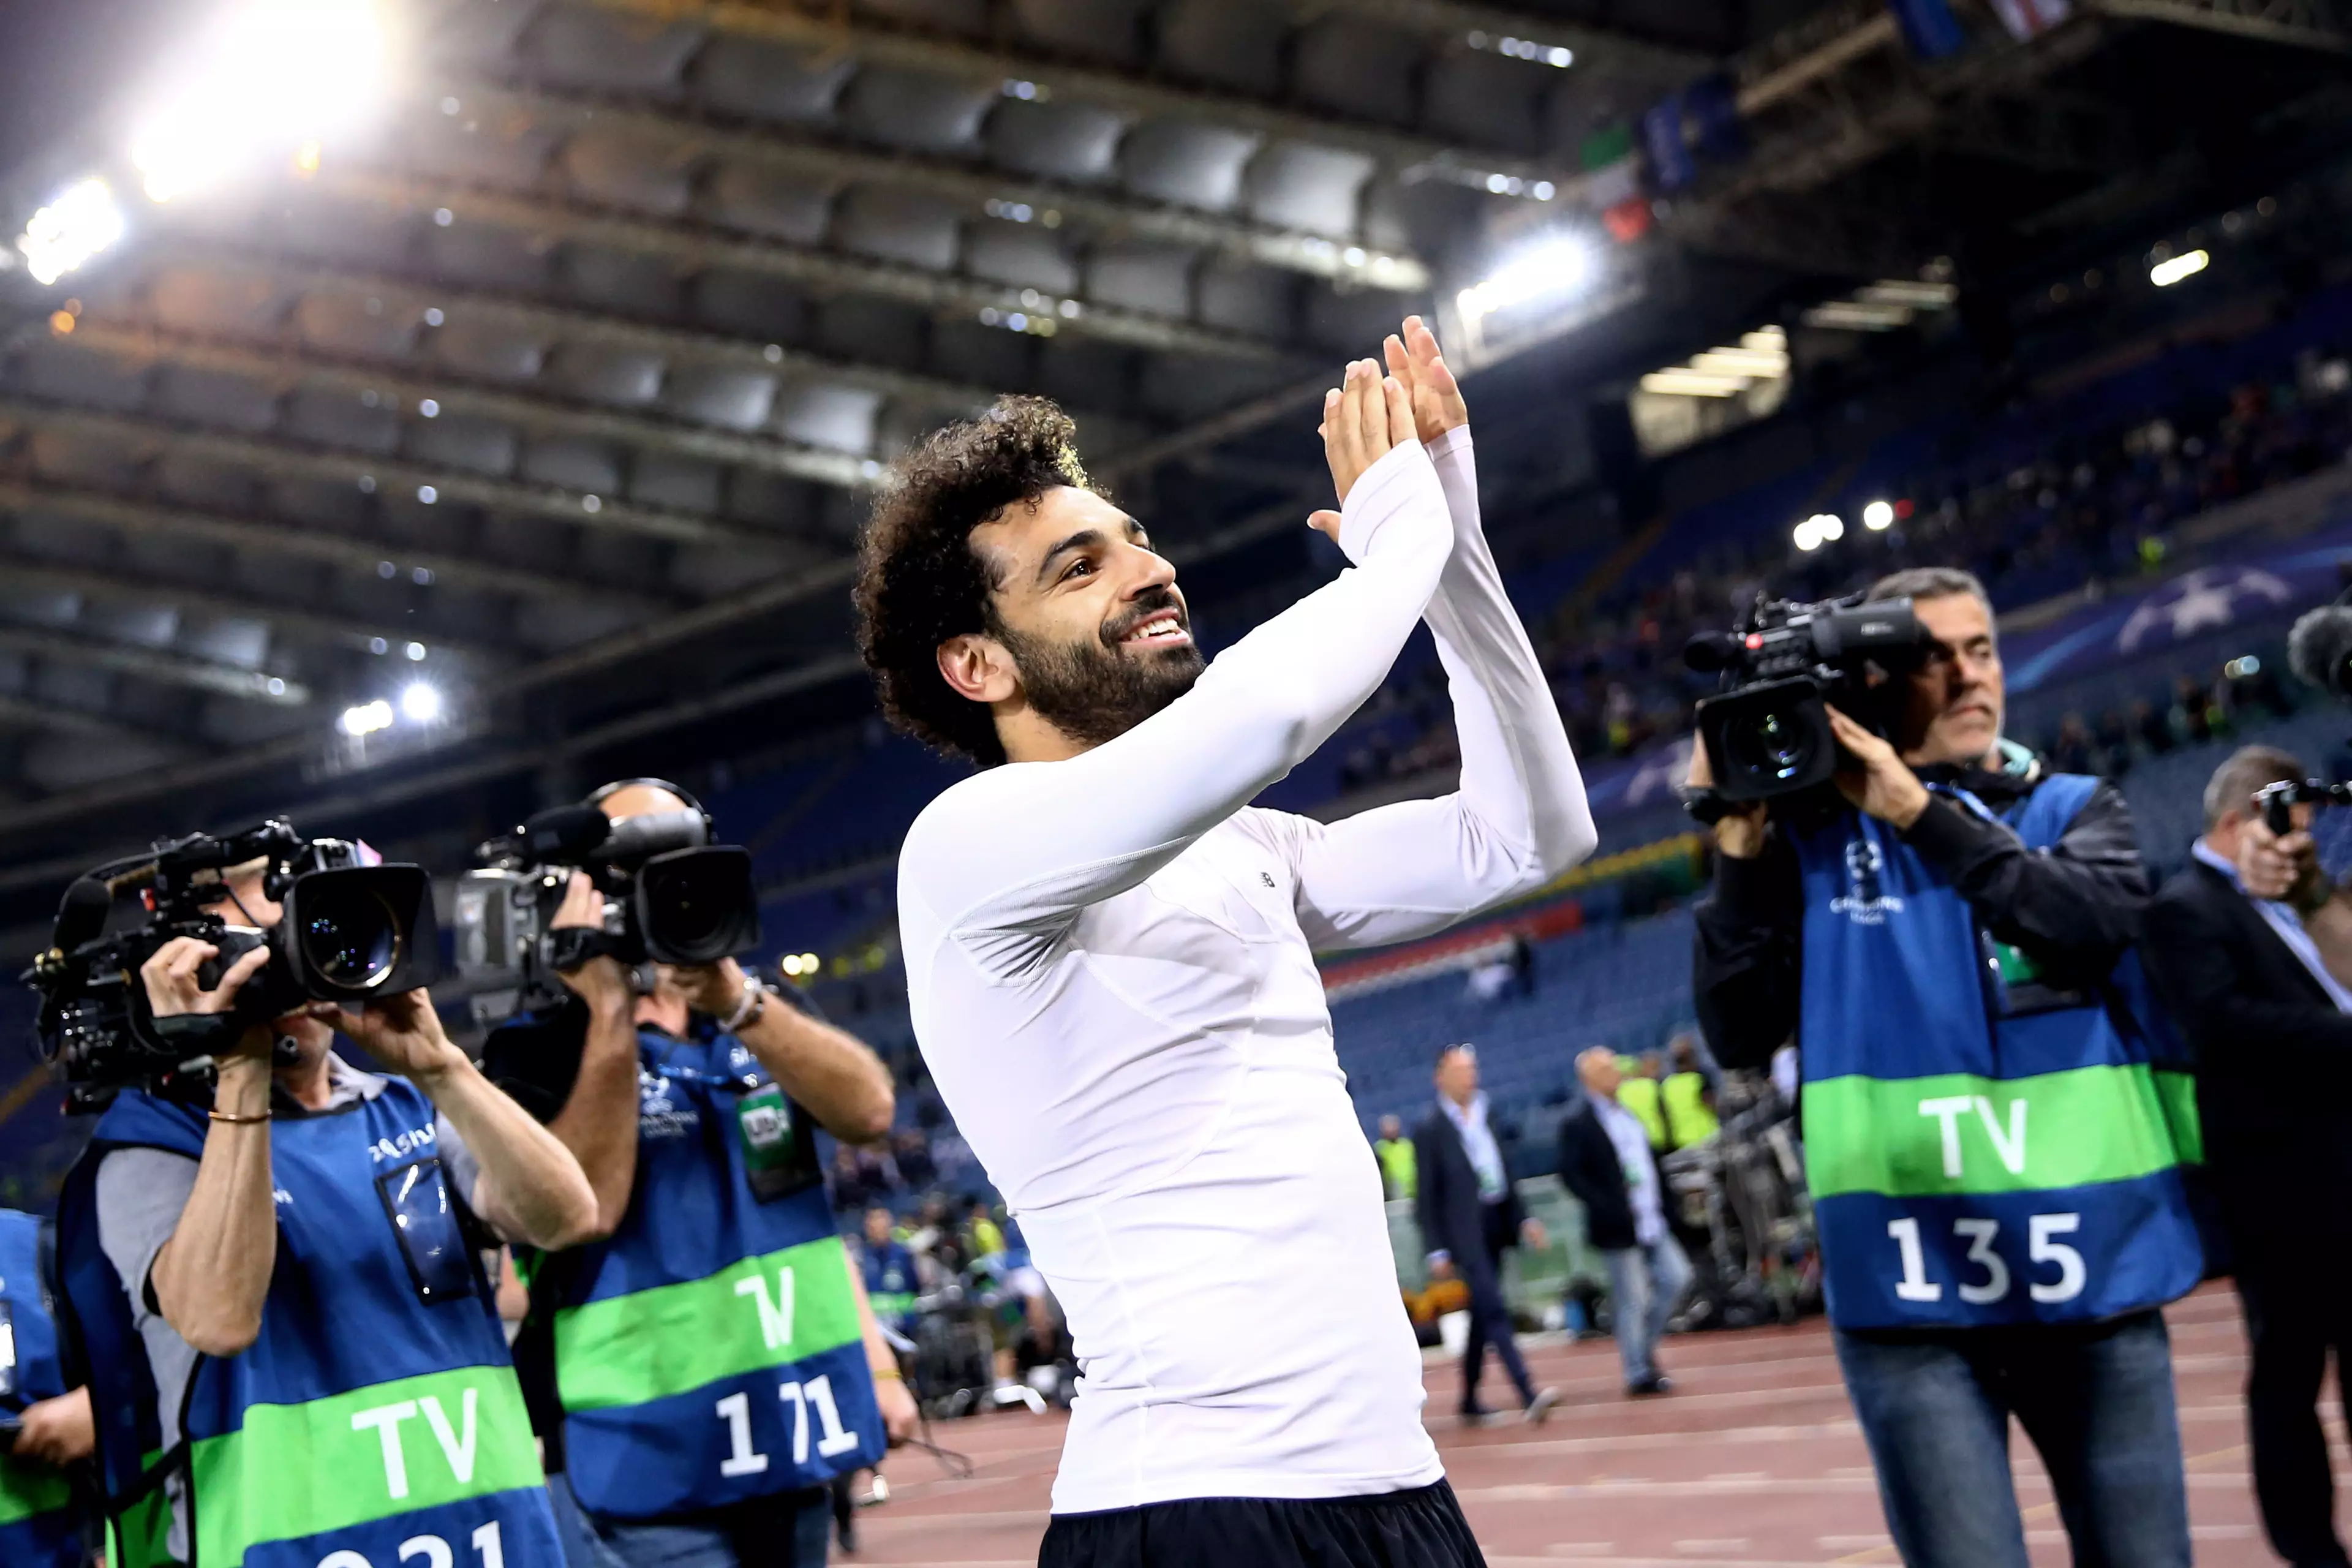 Salah applauds the Liverpool support. Image: PA